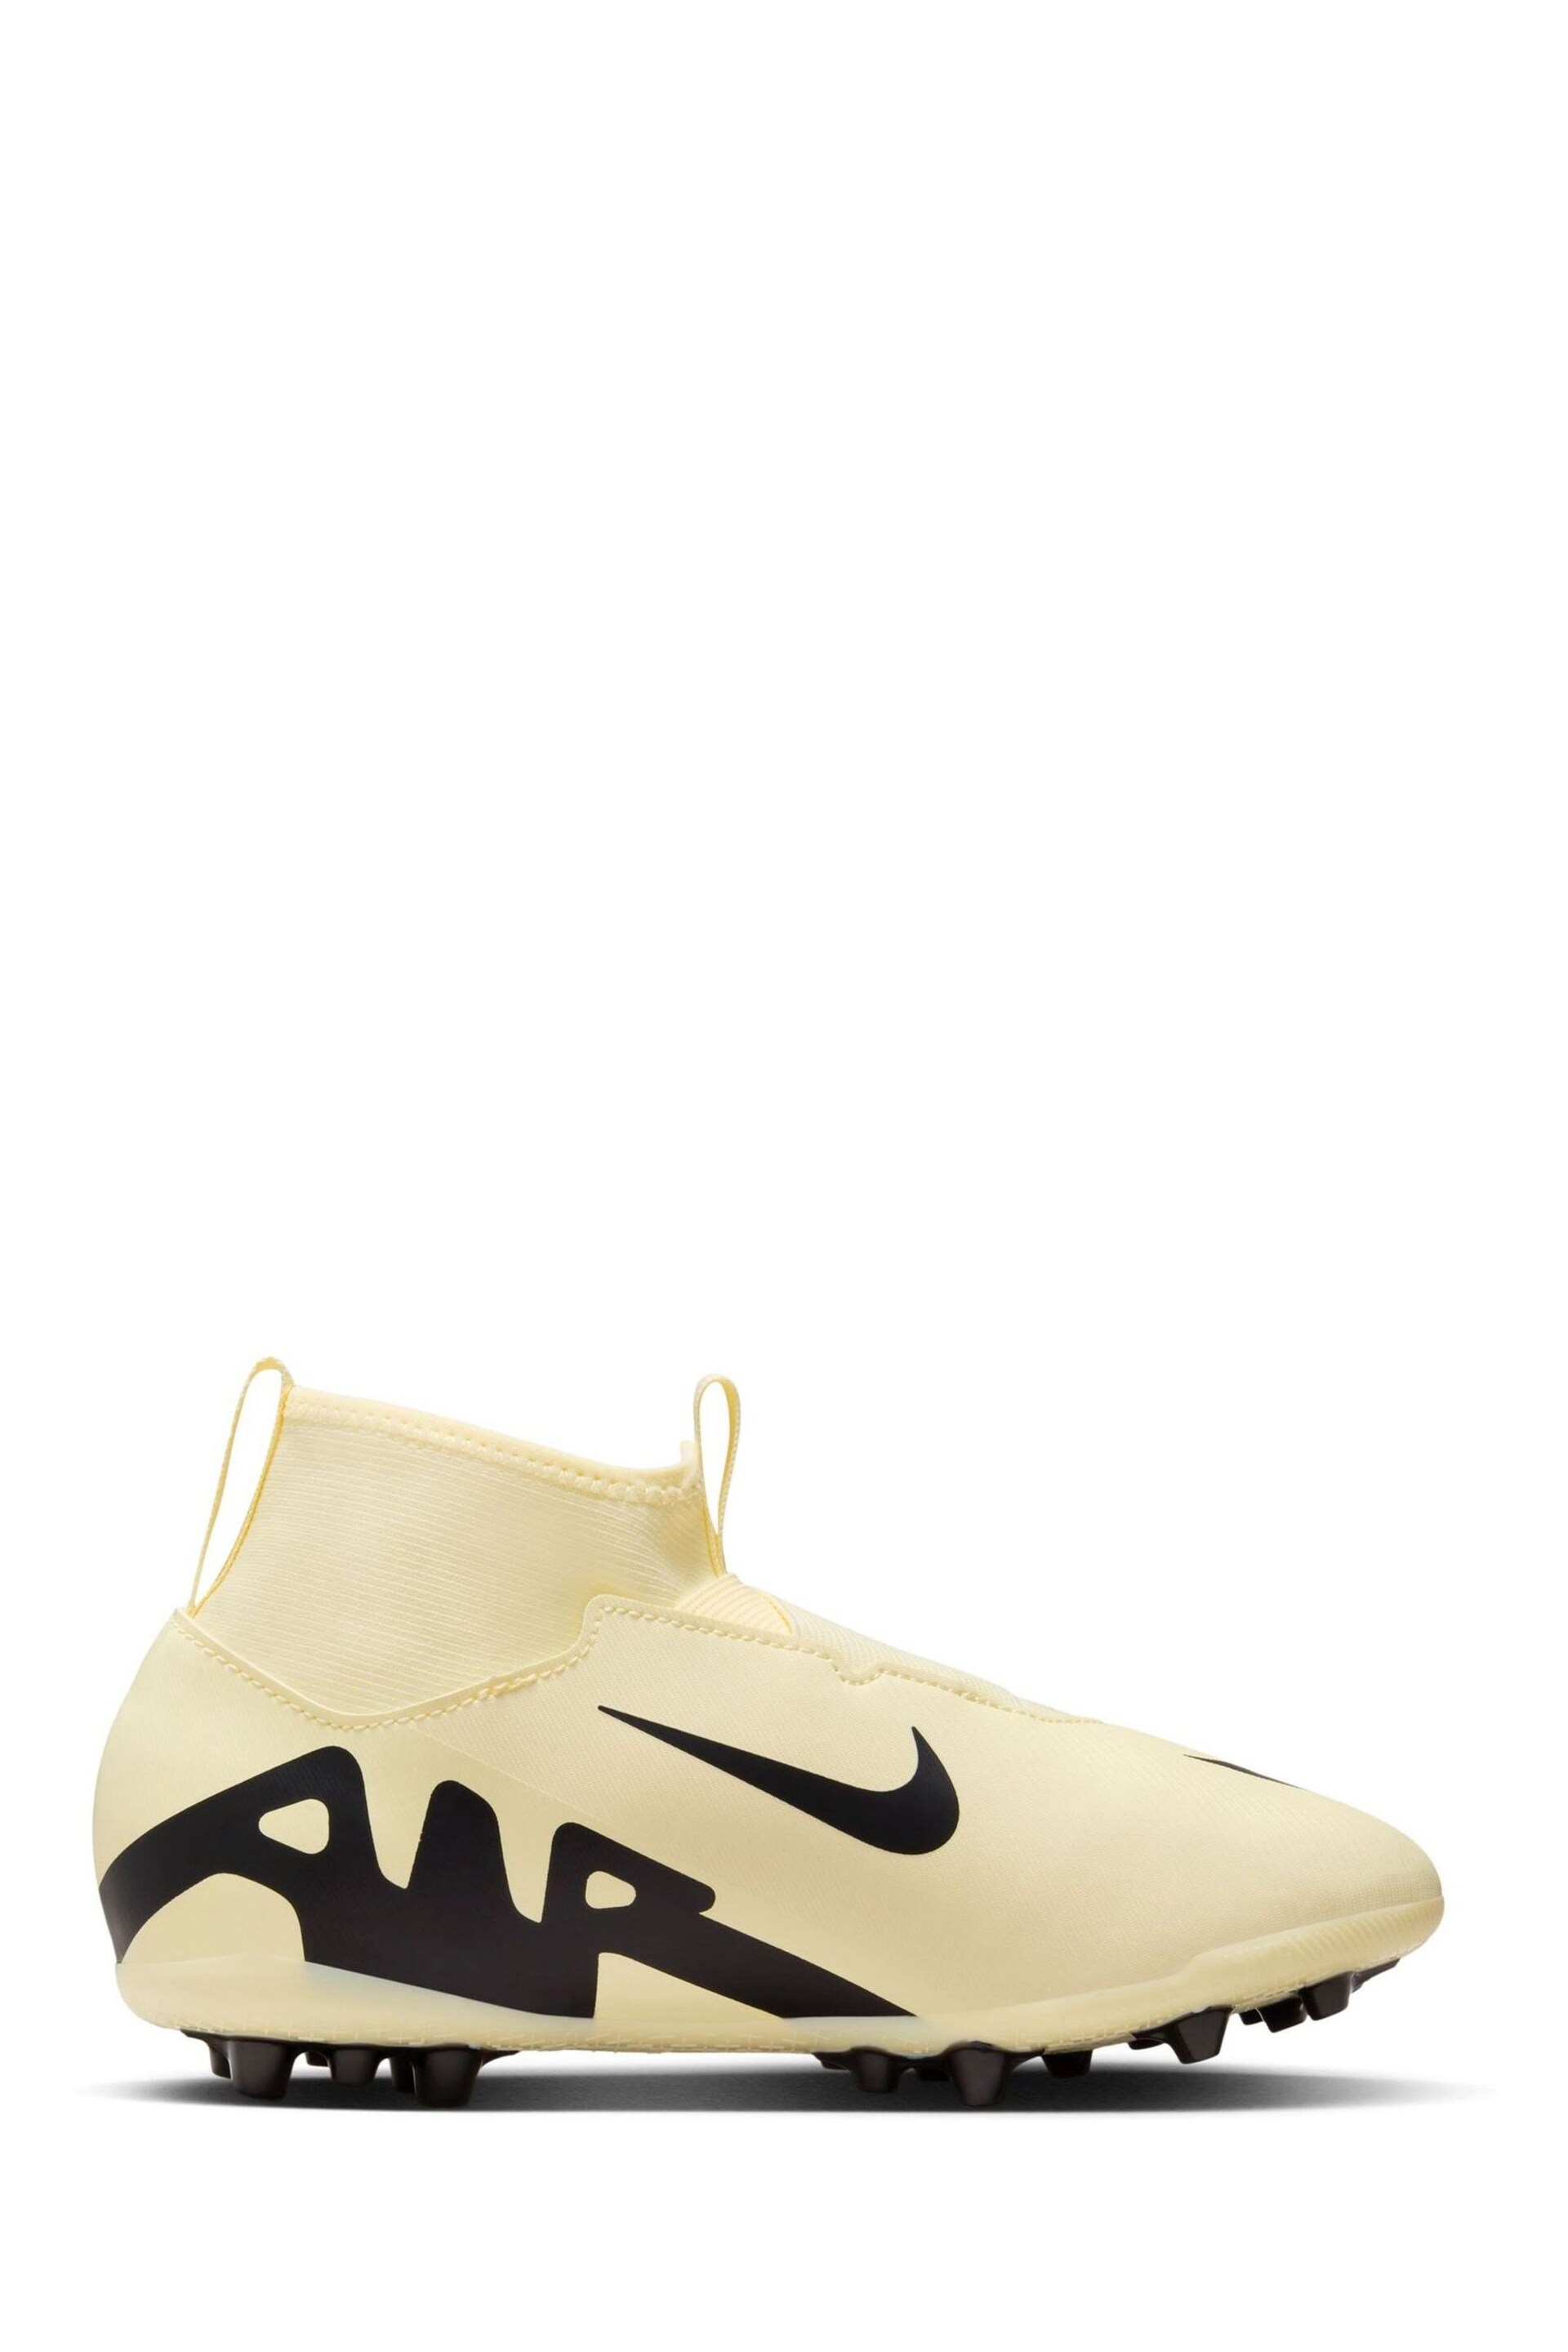 Nike Yellow Jr. Mercurial Superfly 9 Academy Artificial Grass Football Boots - Image 4 of 11